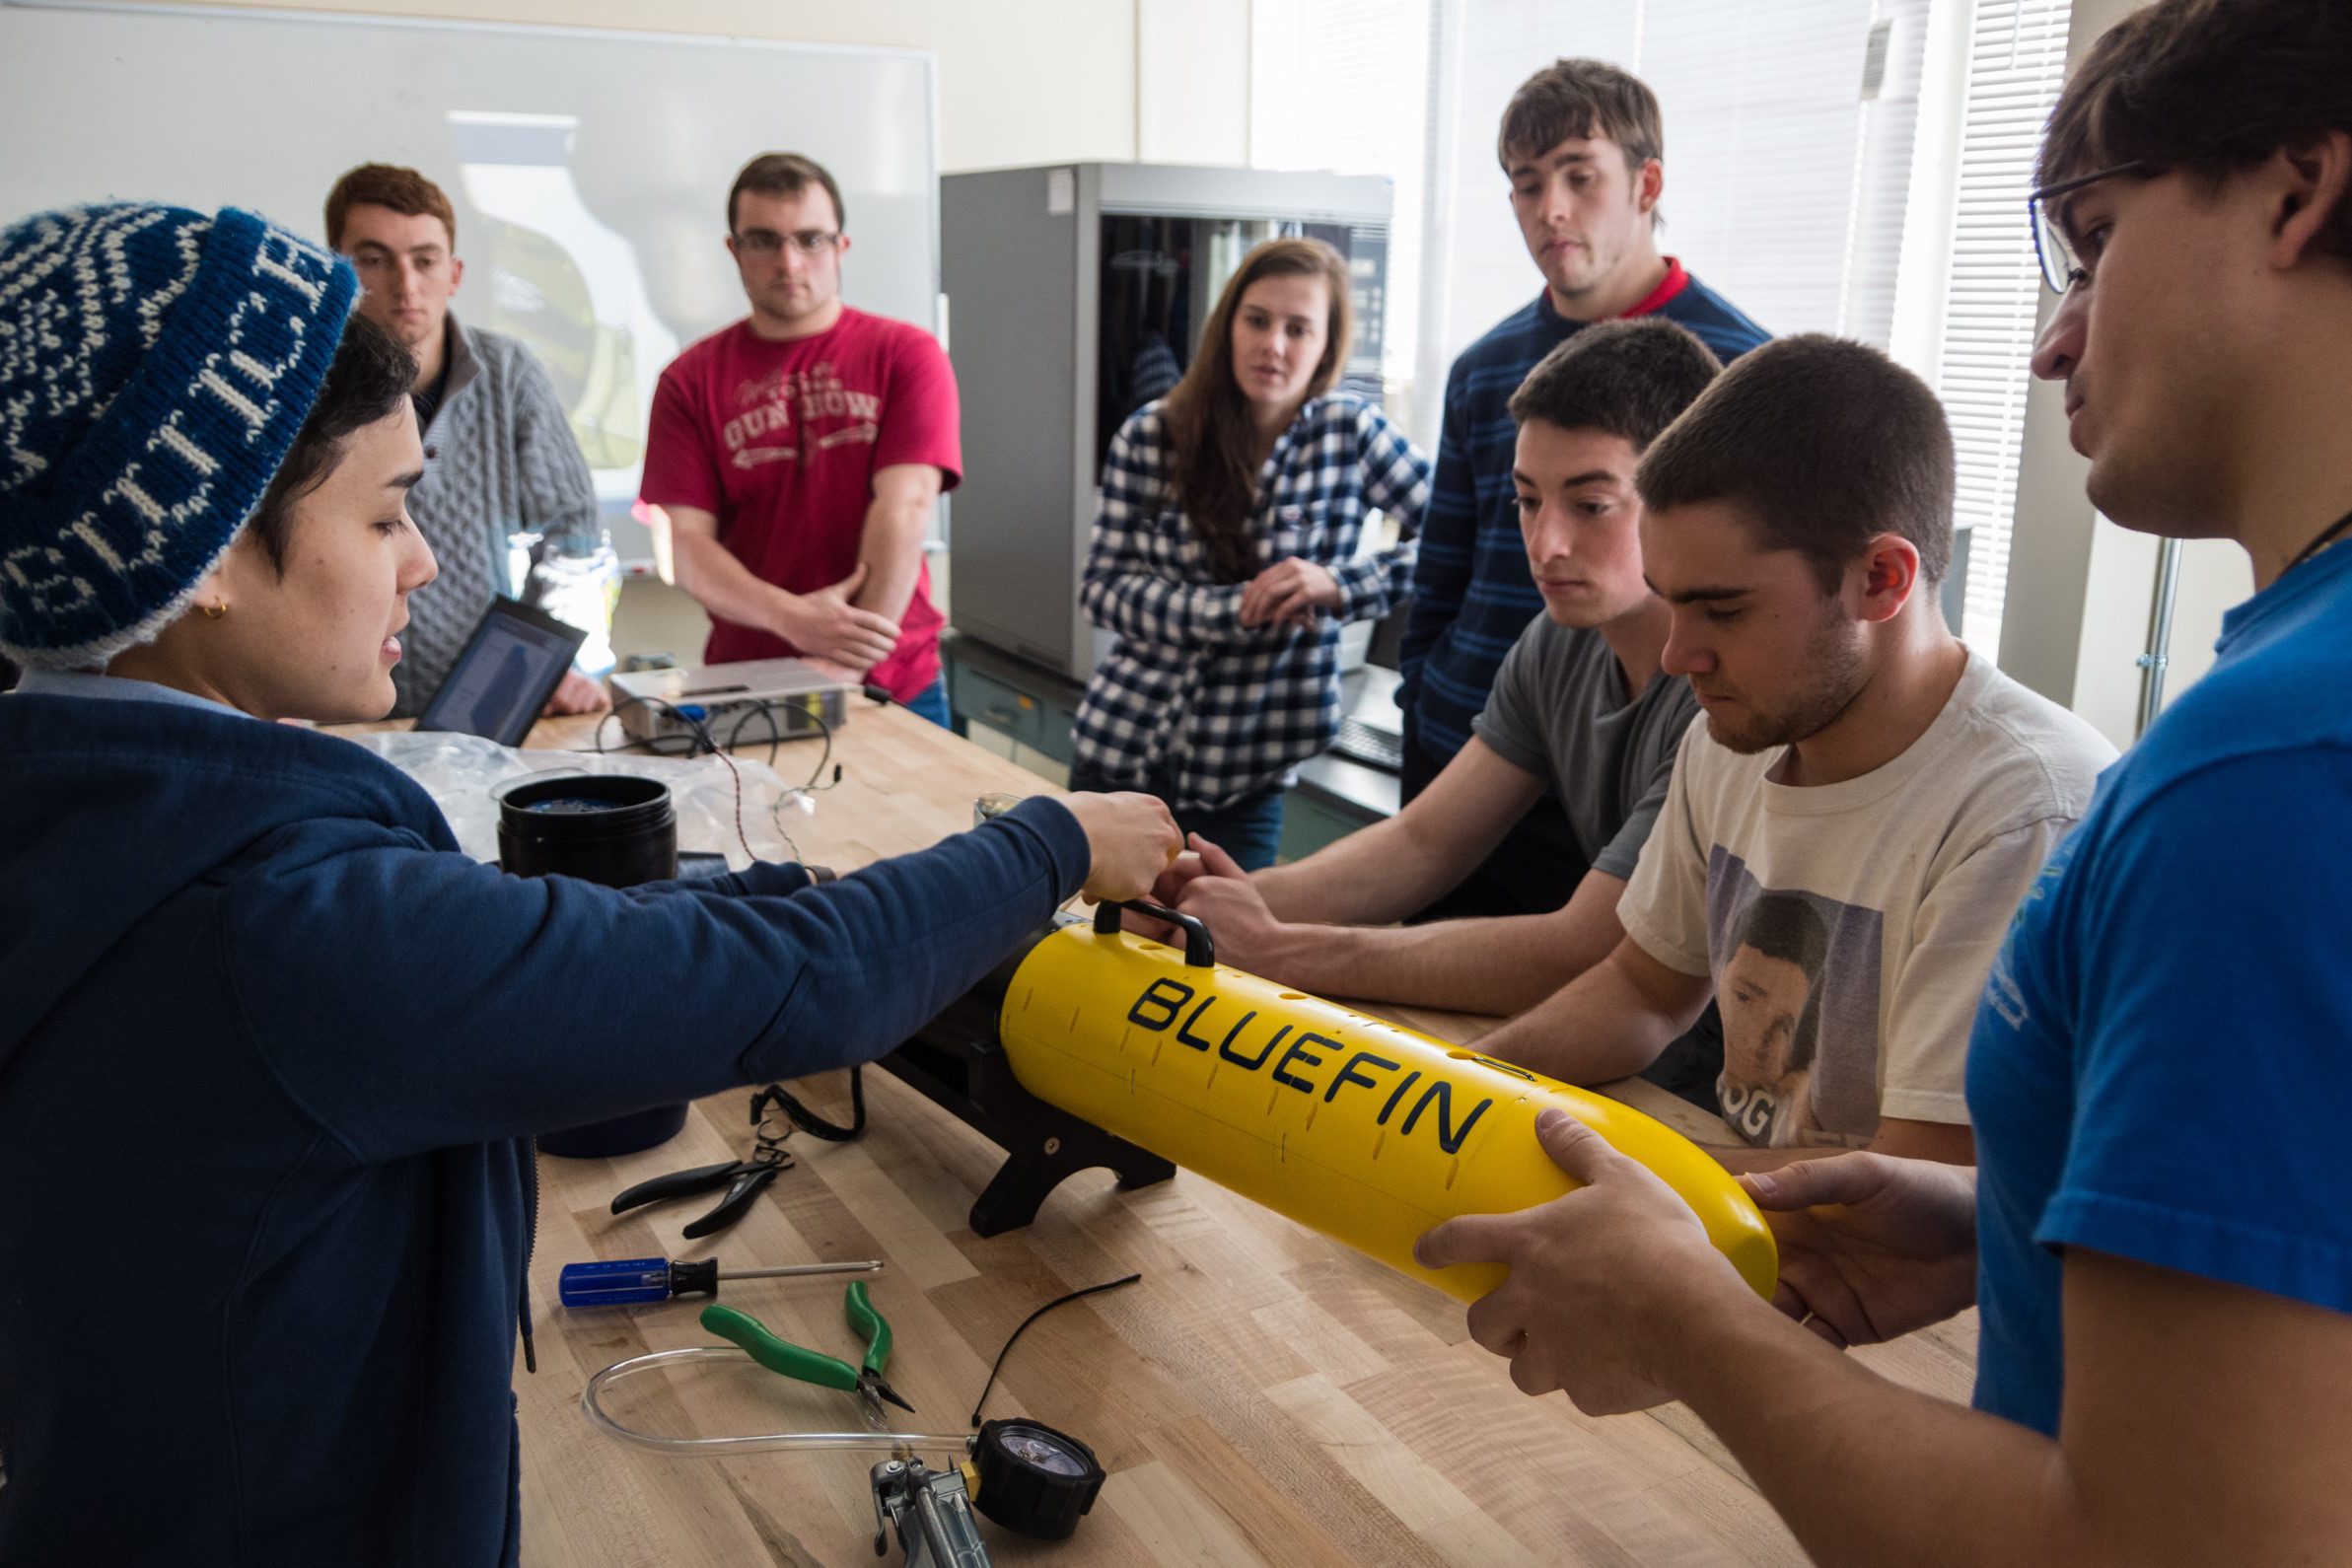 The Navy STEM Crew incorporates community building, education, leadership, and professional development components to inspire students and prepare them for Navy careers. Here, URI students from the Department of Ocean Engineering are conducting prep for an at-sea test of an autonomous underwater vehicle. (University of Rhode Island Photo)